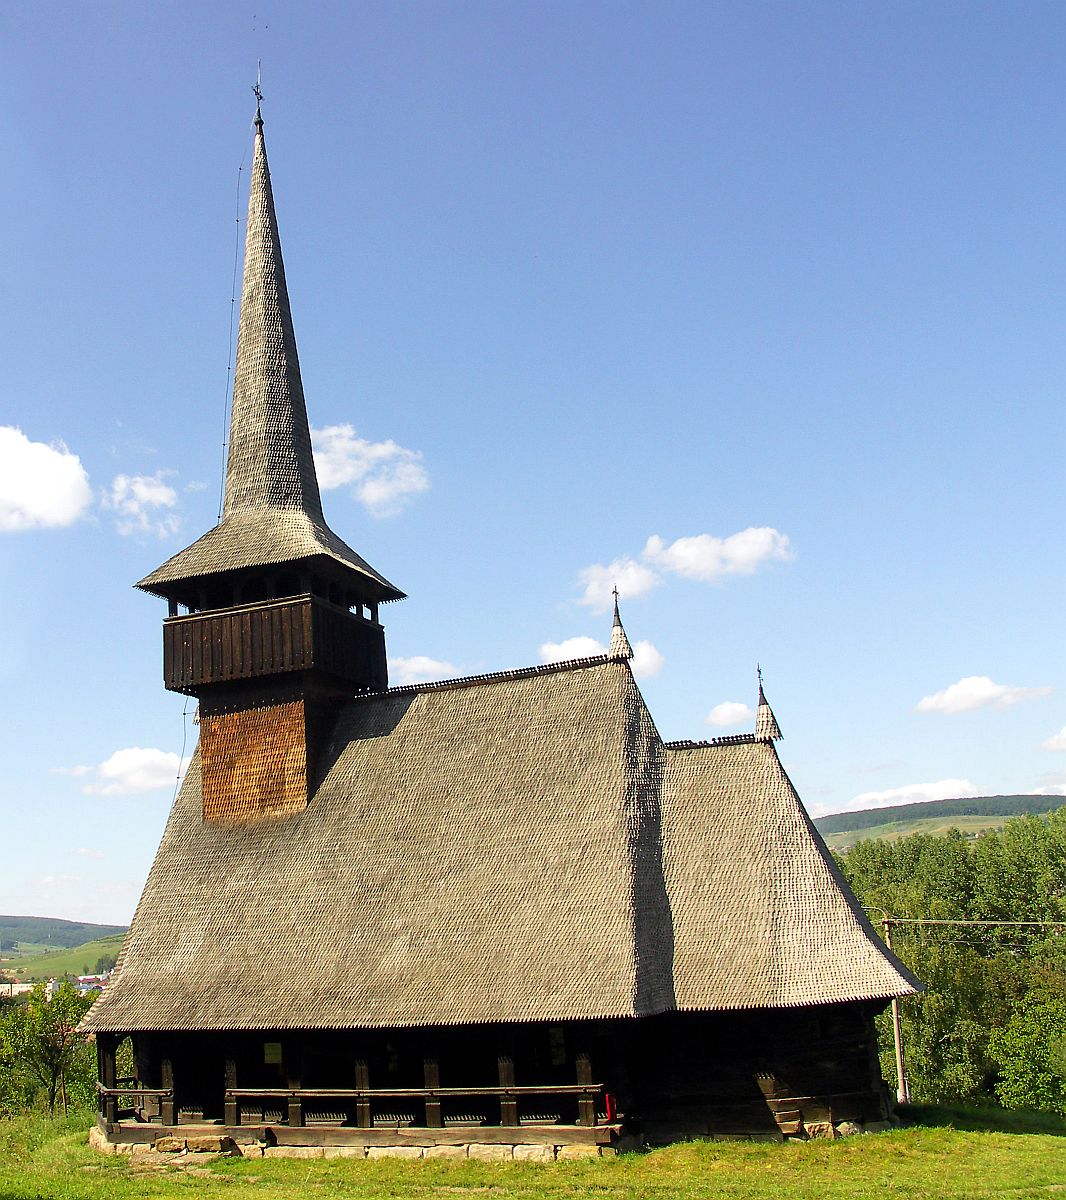 an old wooden church with towers is surrounded by grass